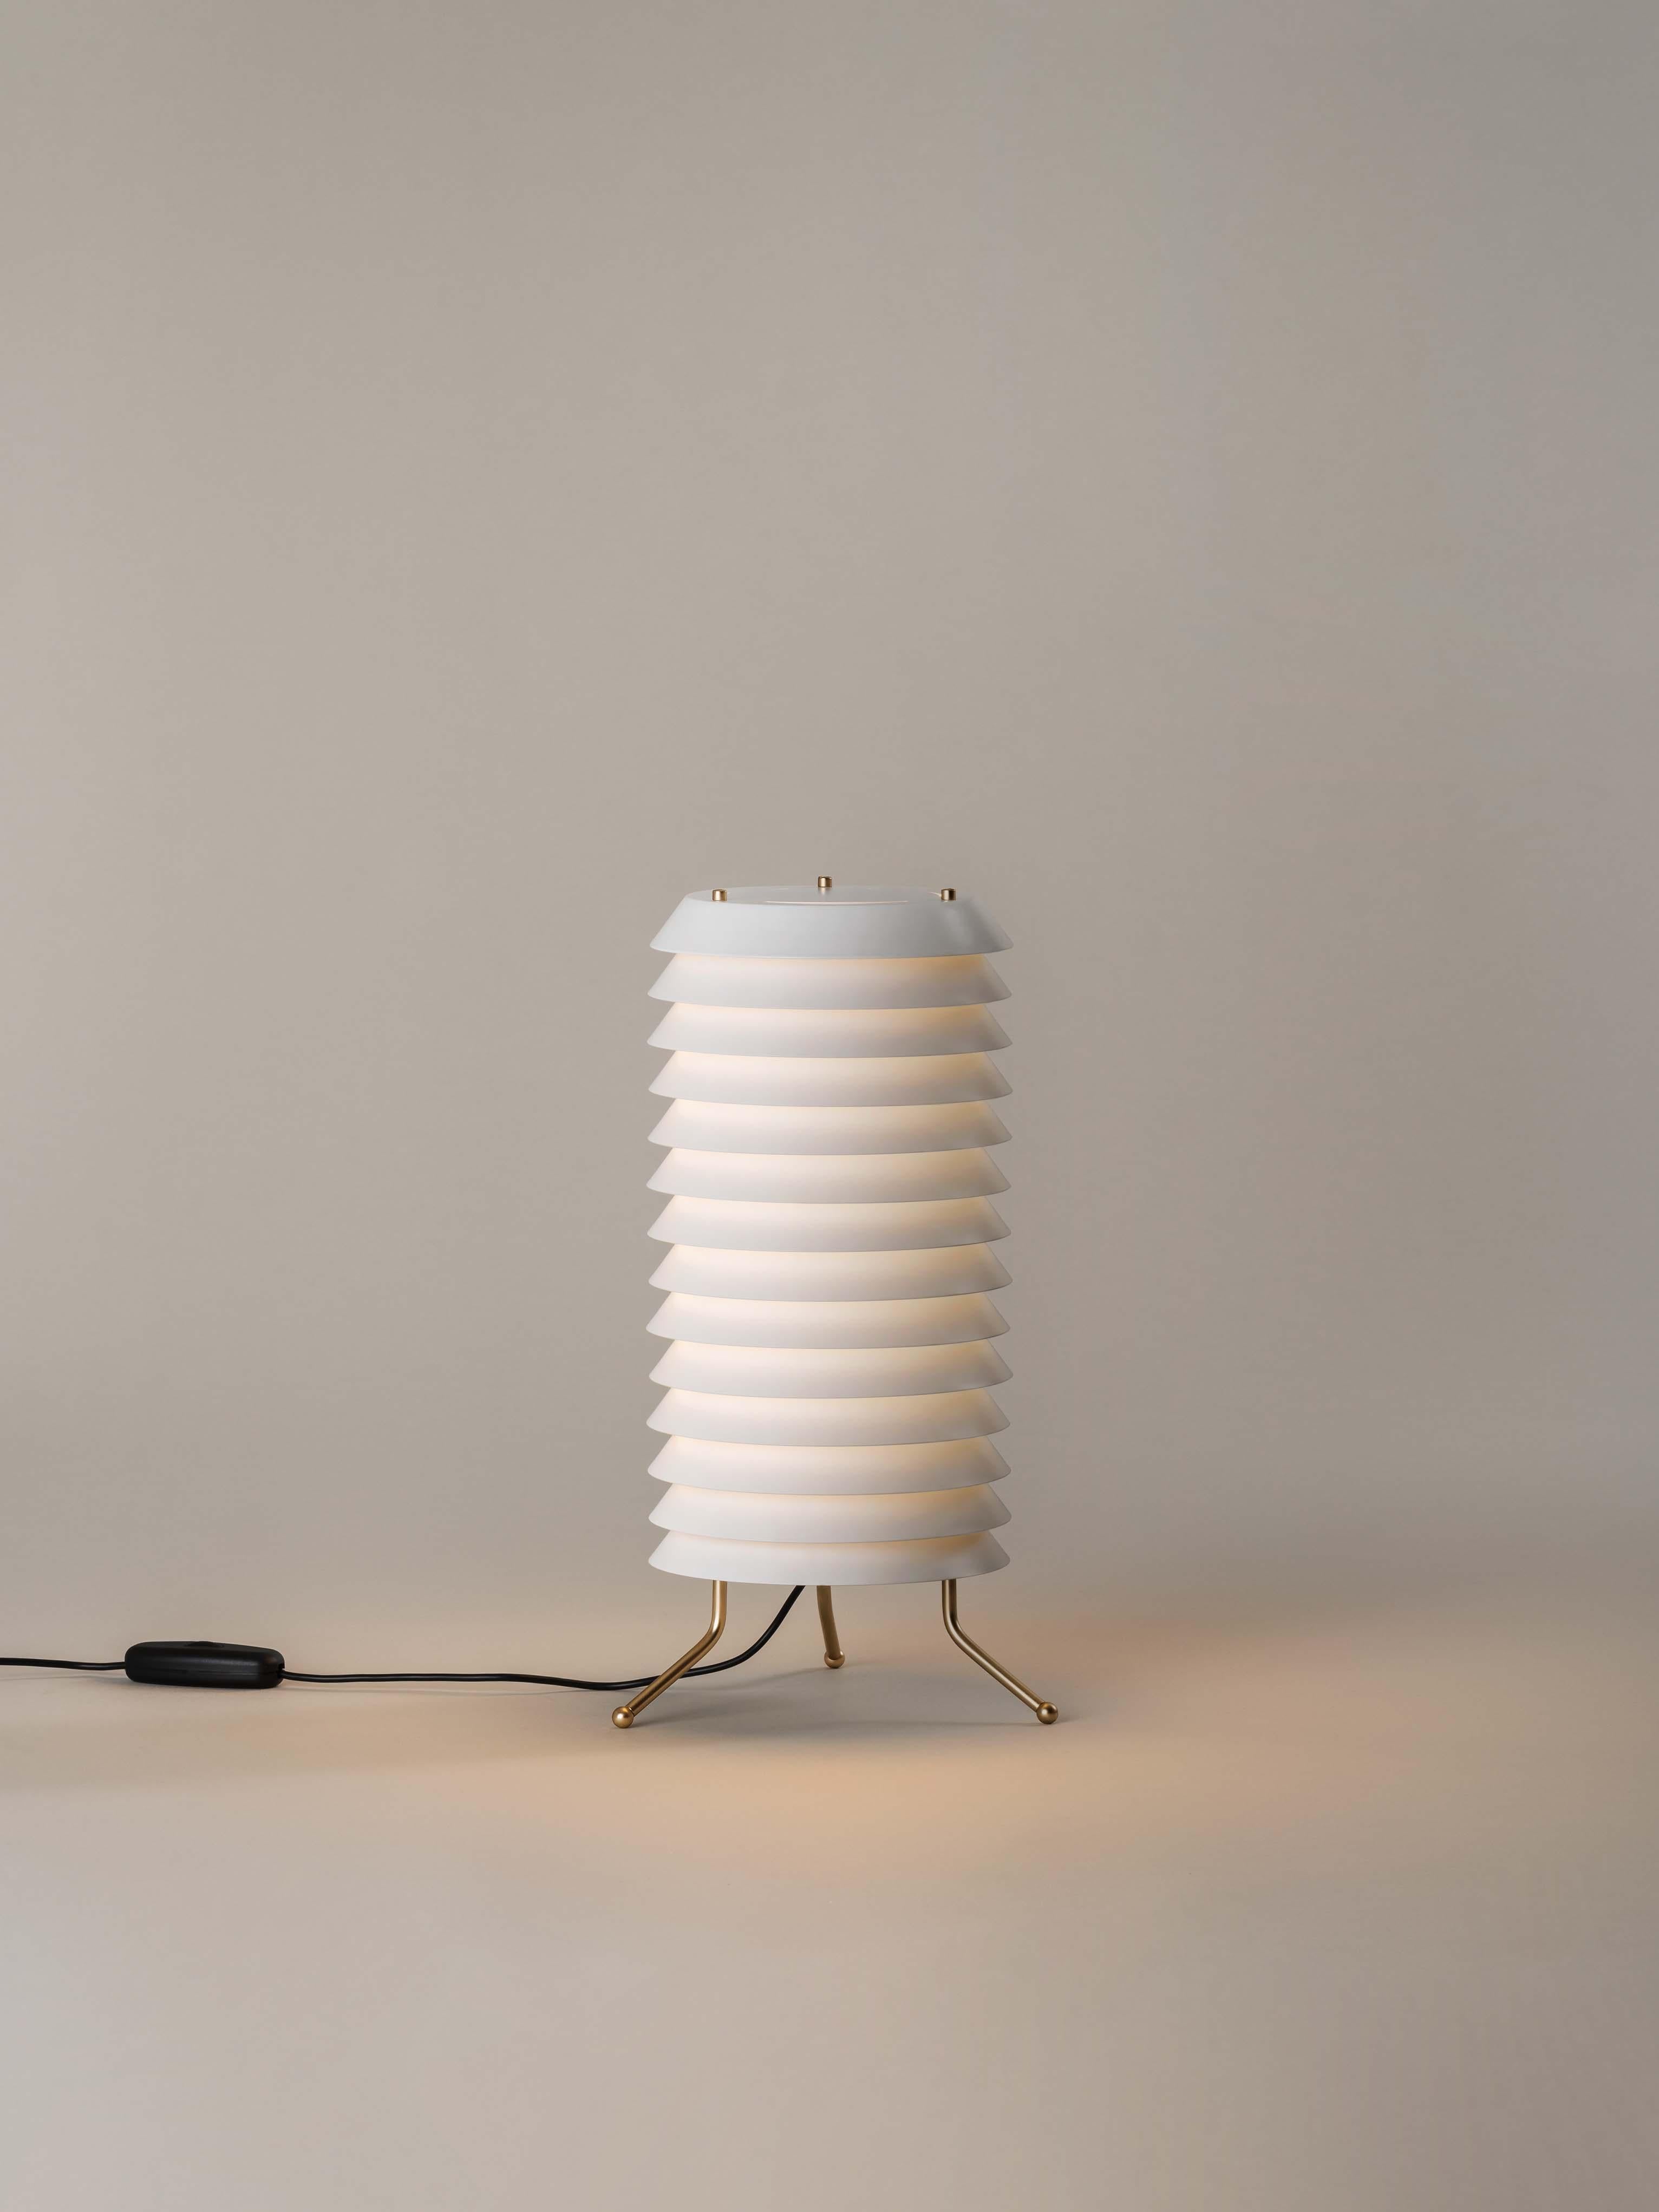 White Maija table lamp by Ilmari Tapiovaara.
Dimensions: D 18 x H 33 cm.
Materials: brass, plastic.
Available in white or nude rose.

Maija conveys the feeling of light typical of Baltic cities, where the streets are barely illuminated, apart